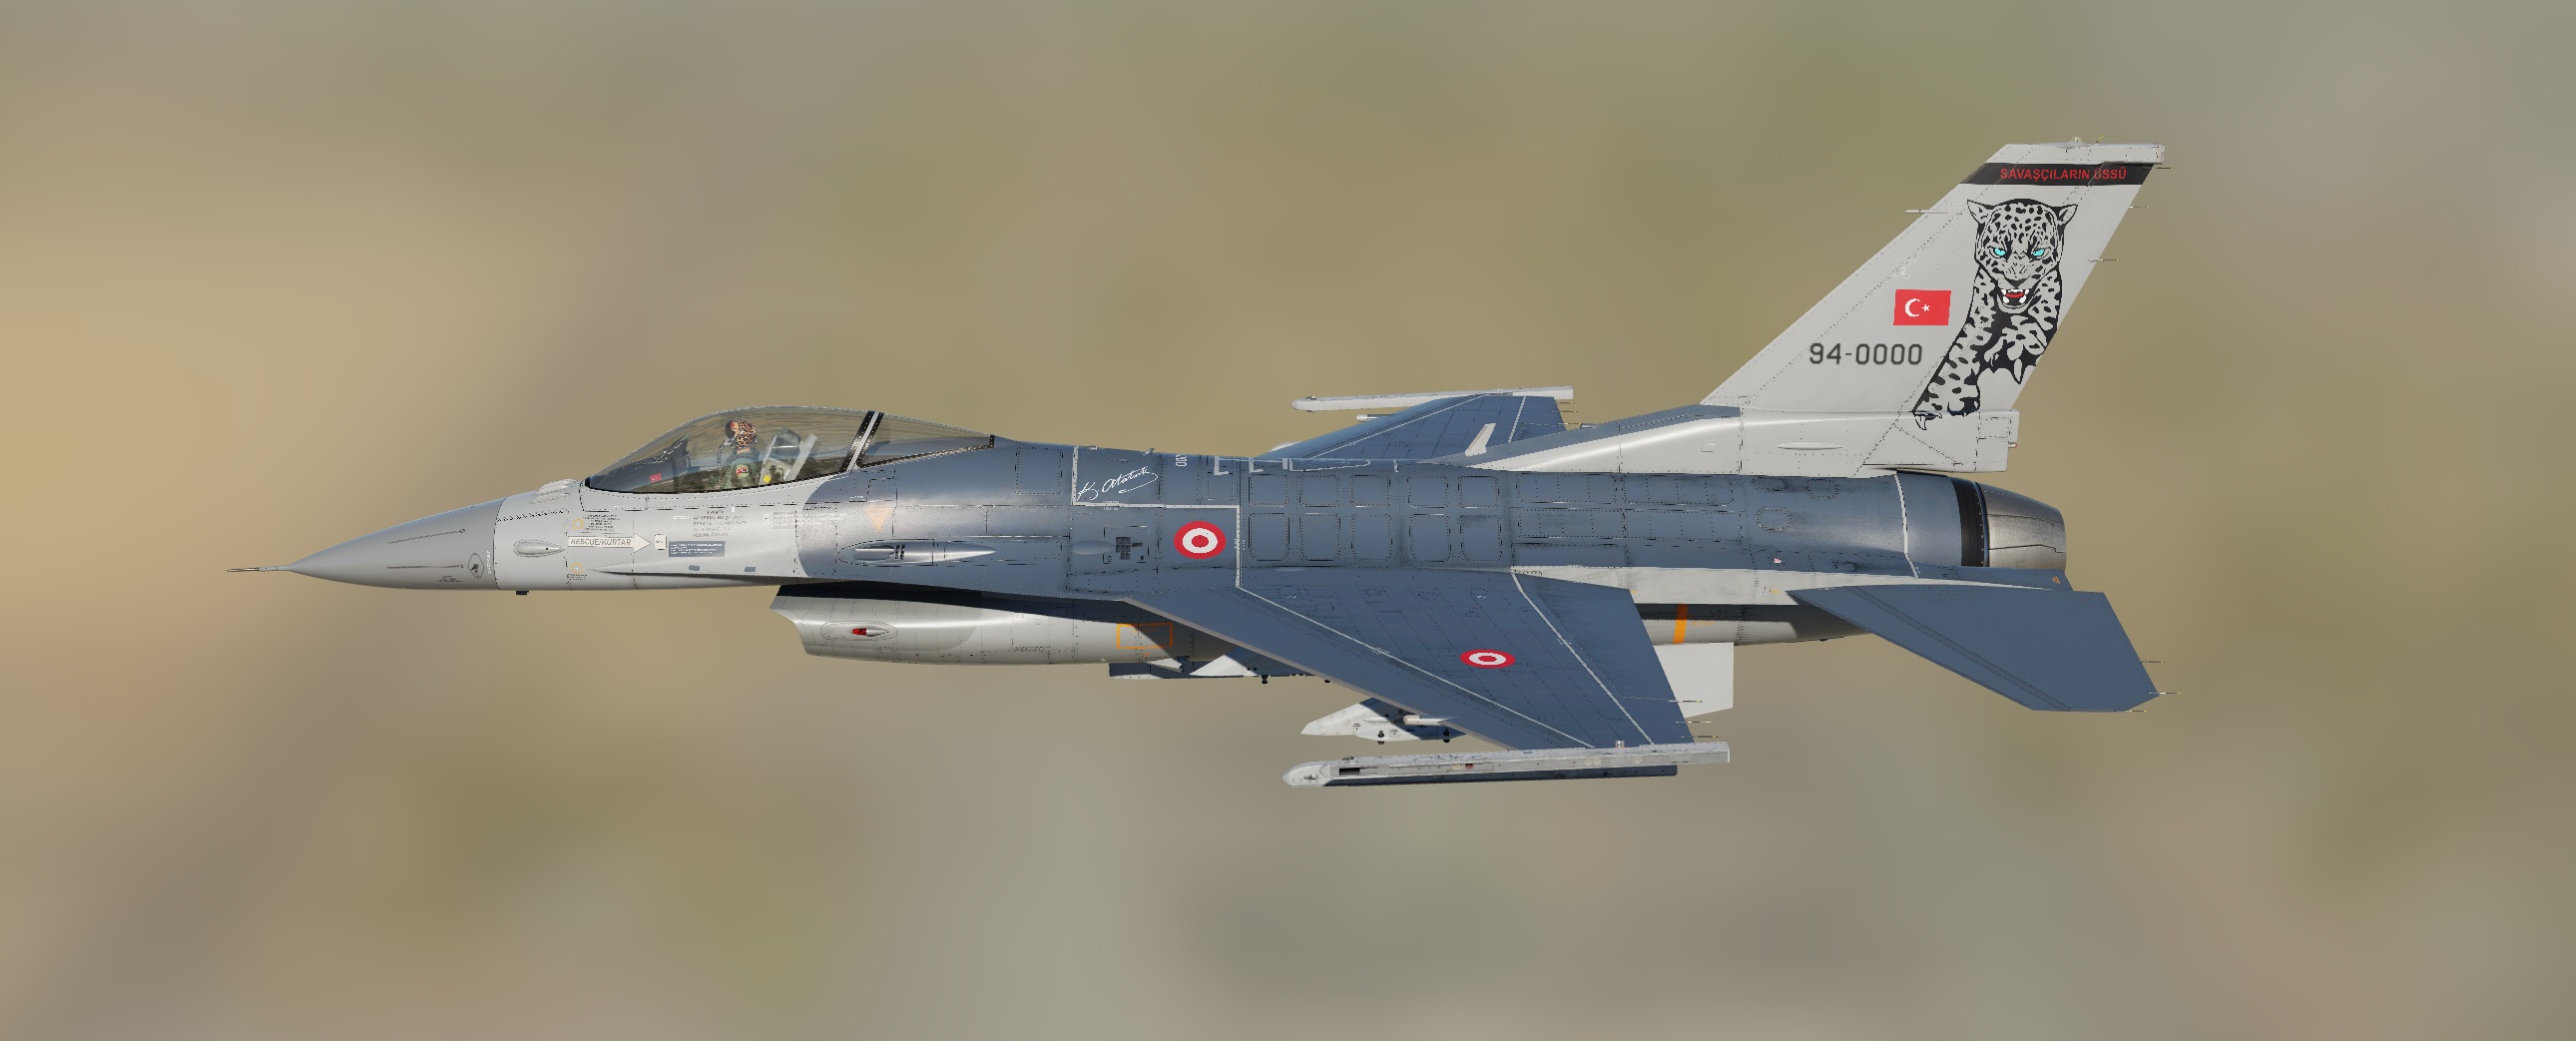 Turkish Air Force 181.Pars Filo_High resolution